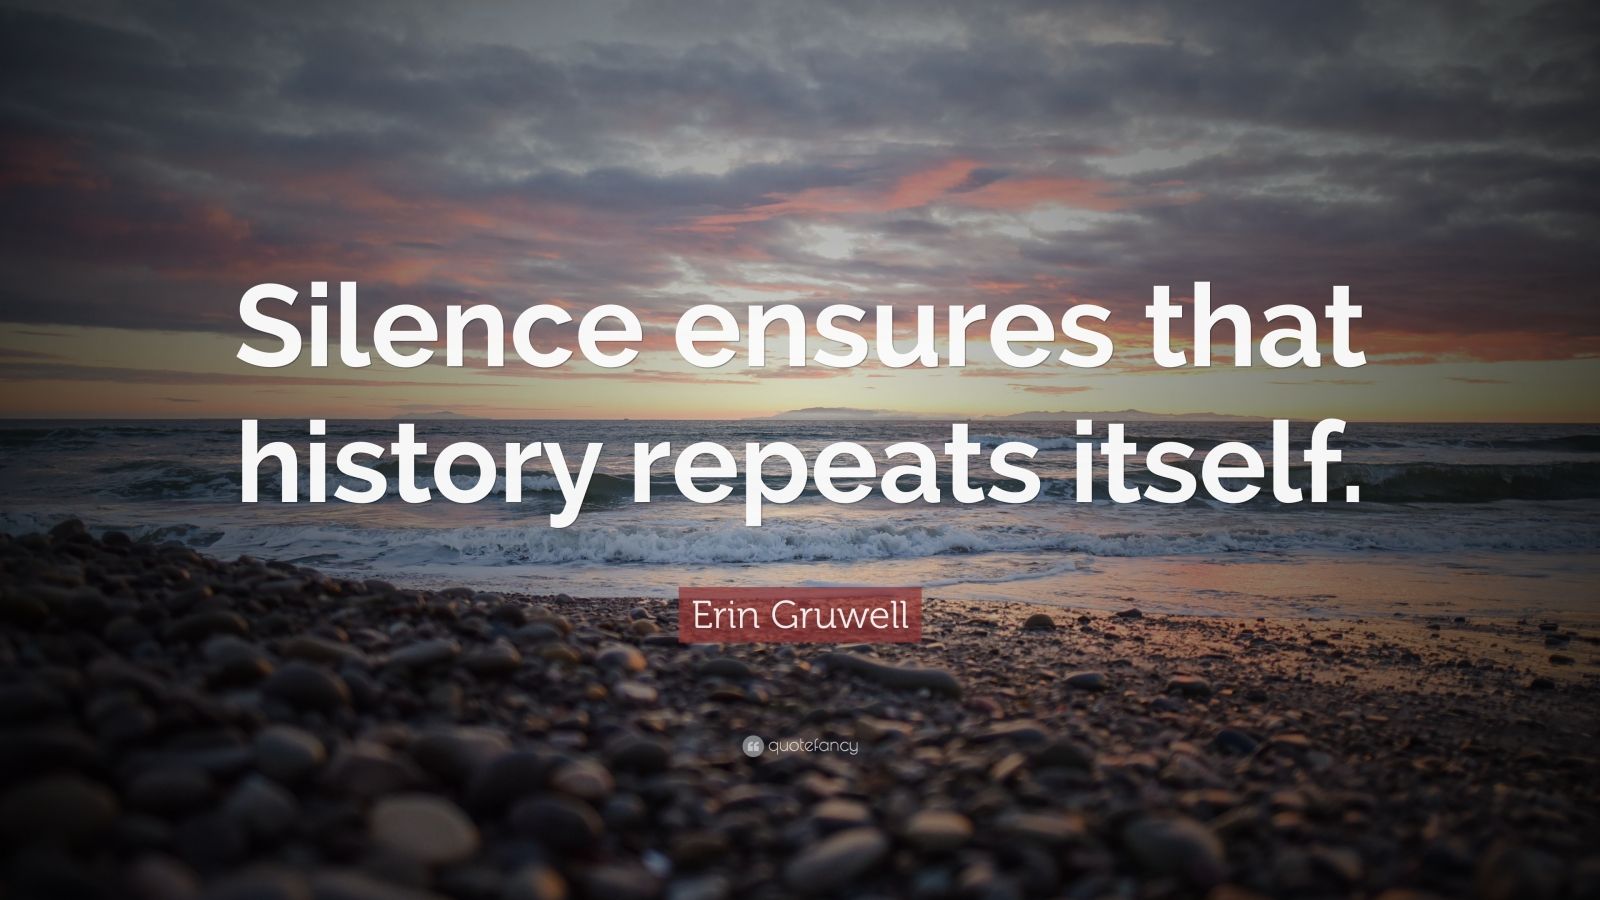 Erin Gruwell Quote: “Silence ensures that history repeats itself.” (12